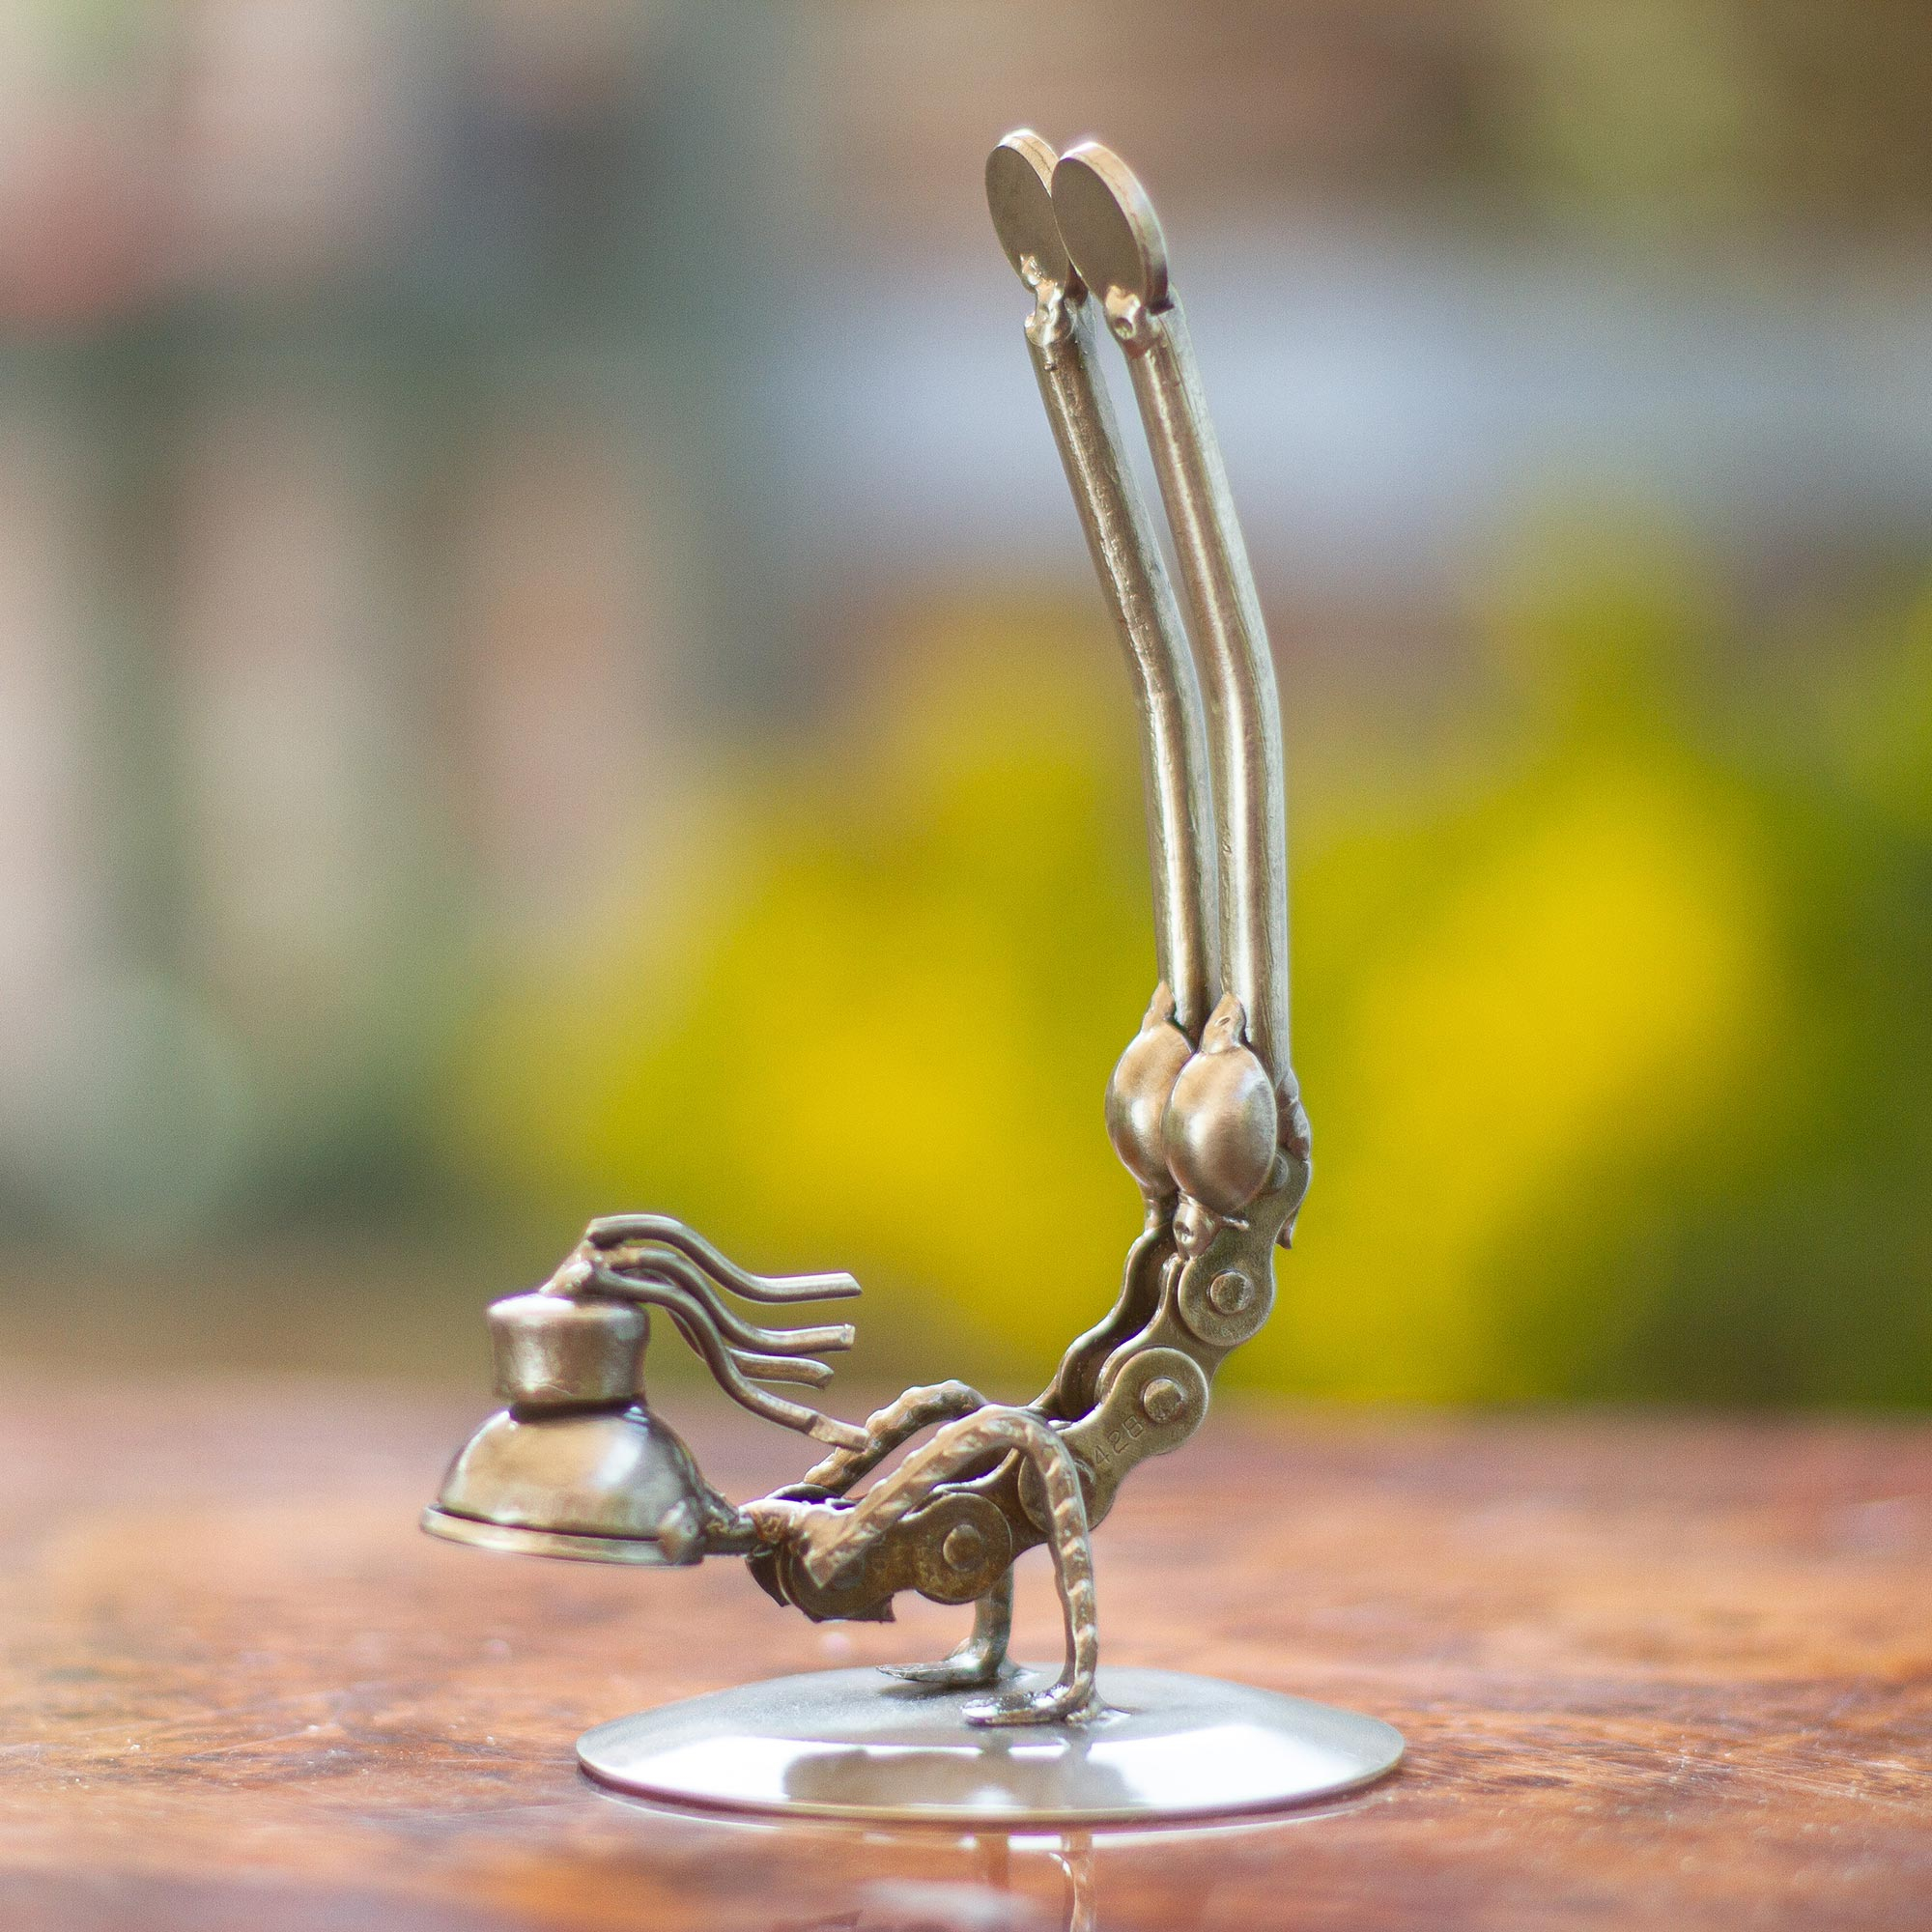 Recycled Metal Yoga Pose Statuette from Mexico - Peacock Pose I